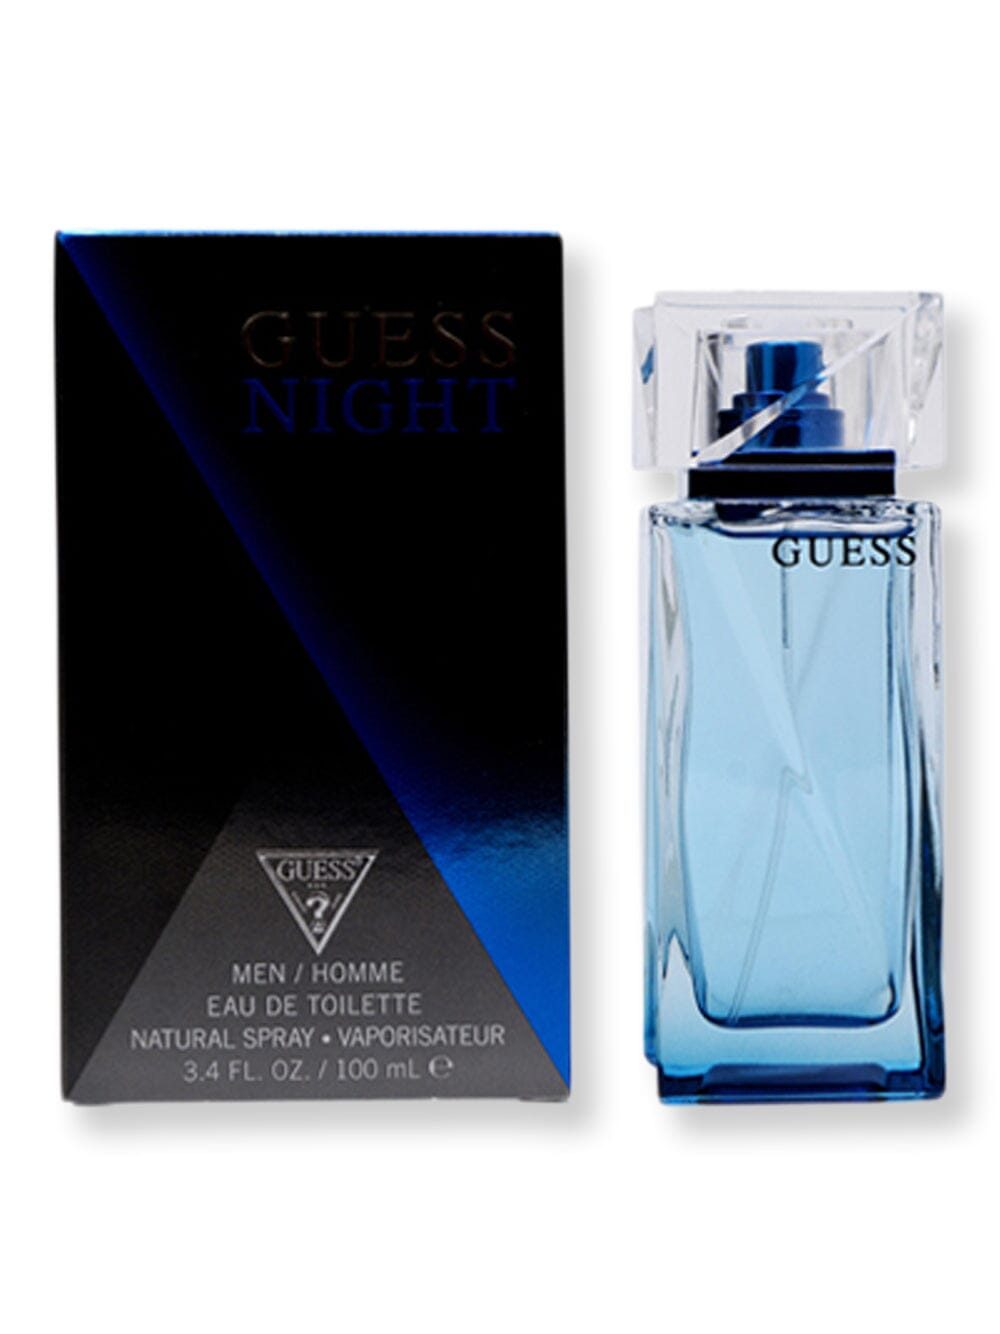 Guess Guess Night EDT Spray 3.4 oz100 ml Perfume 